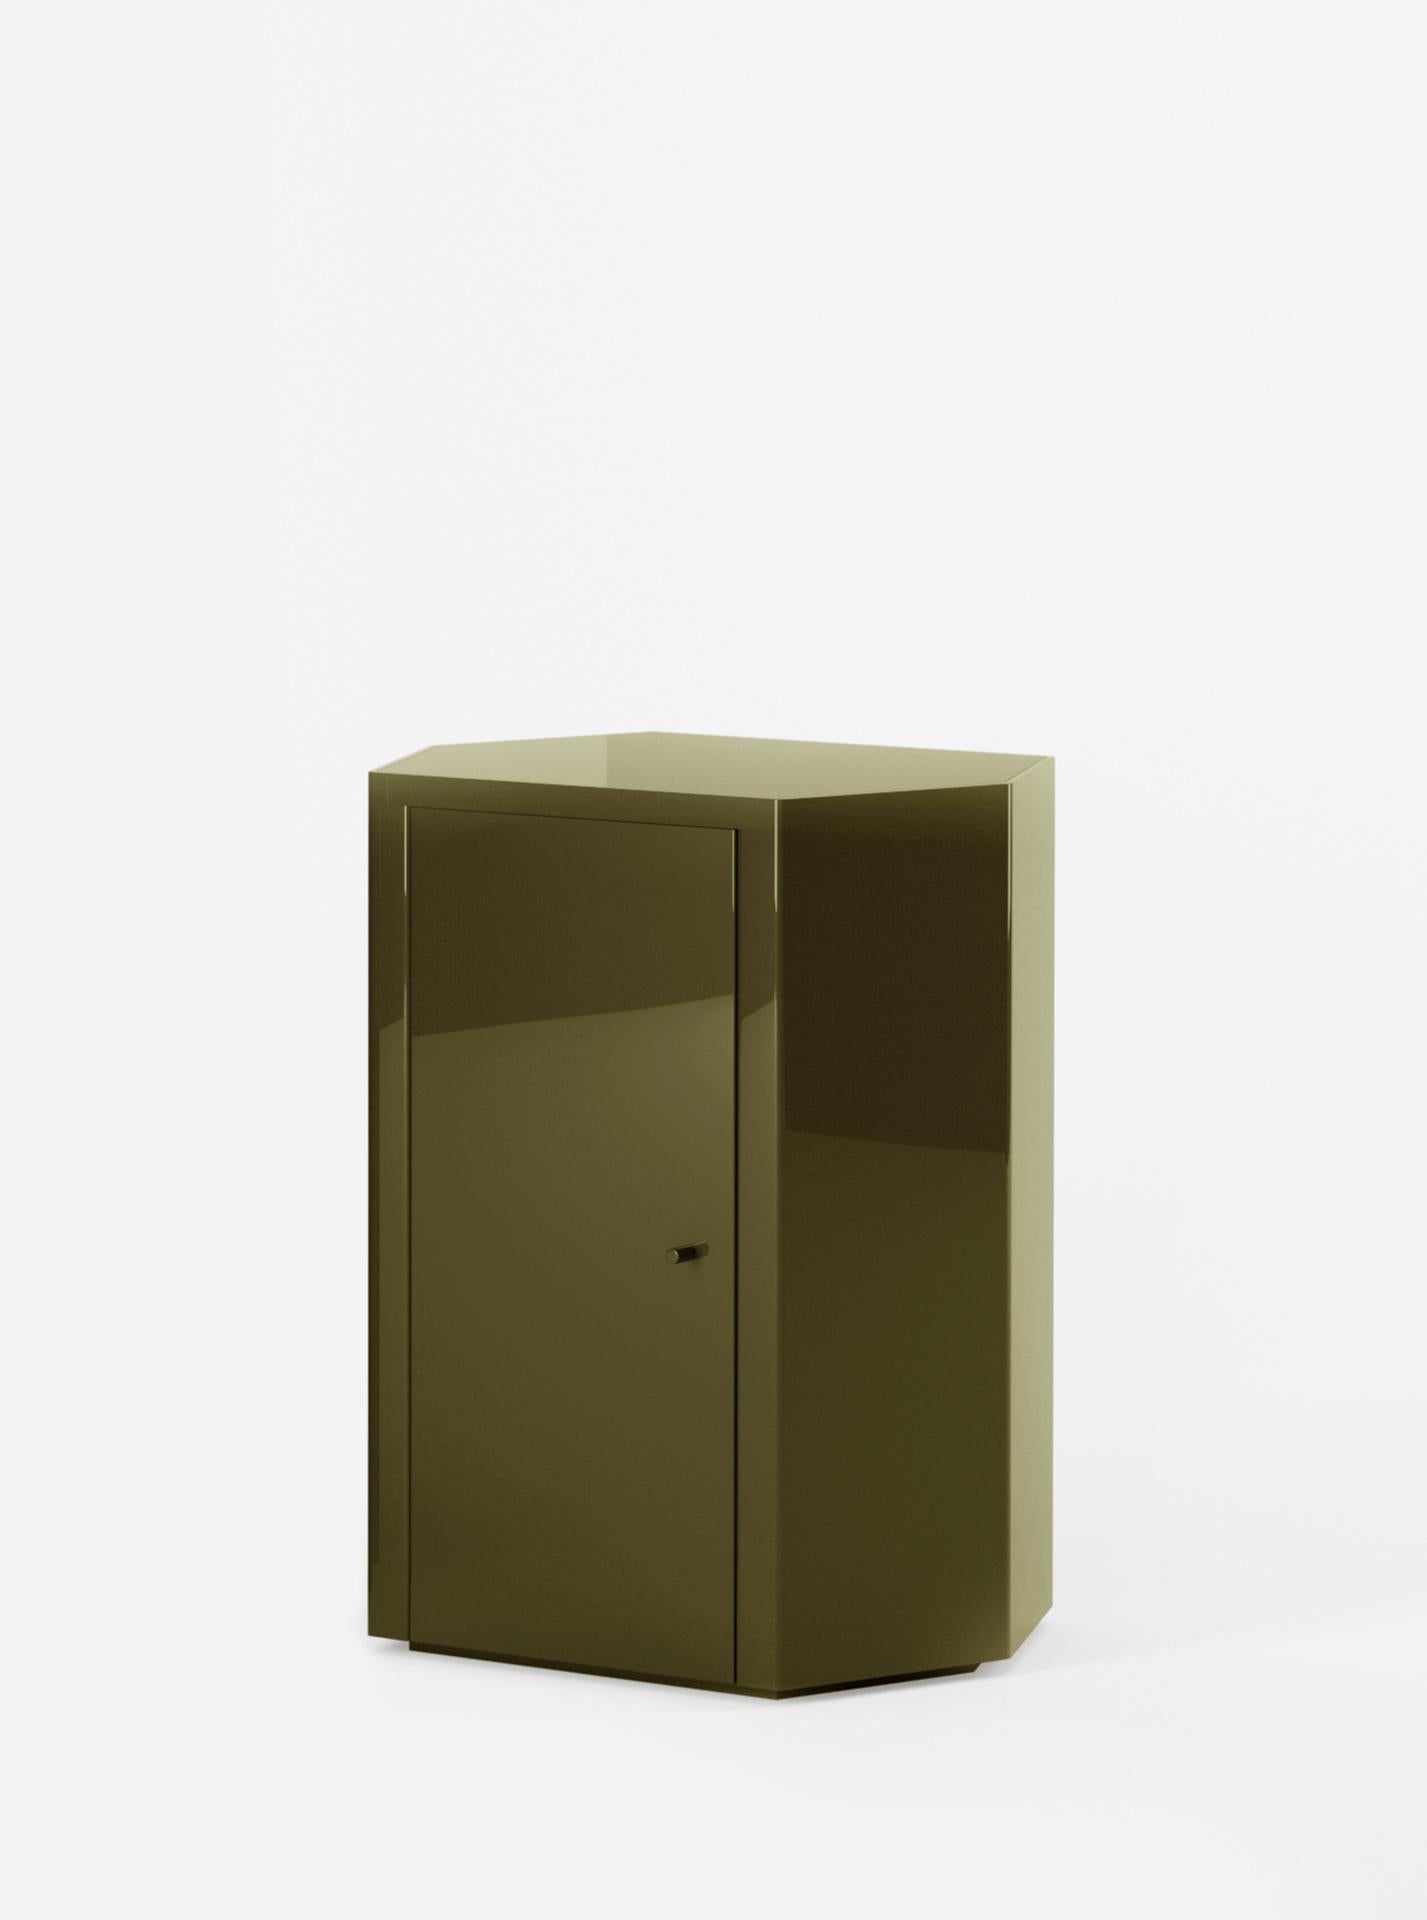 South African Pair of Park Night Stands in Uniform Olive Green Lacquer by Yaniv Chen for Lemon For Sale